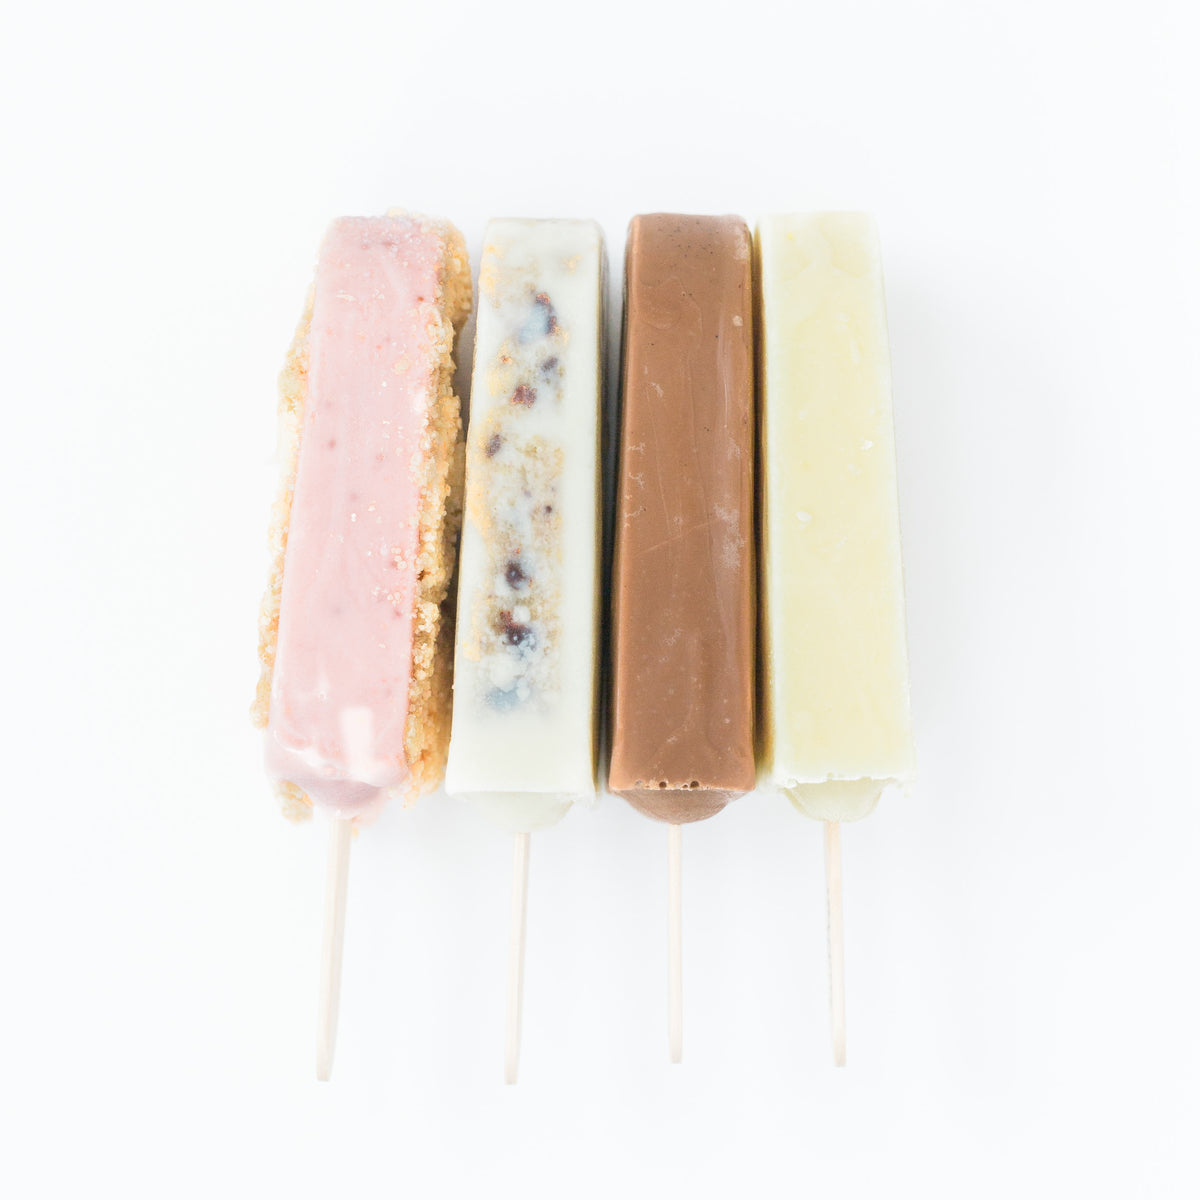 joy pops on a white background orange cream fudgsicle strawberry shortcake and milk and cookies pops